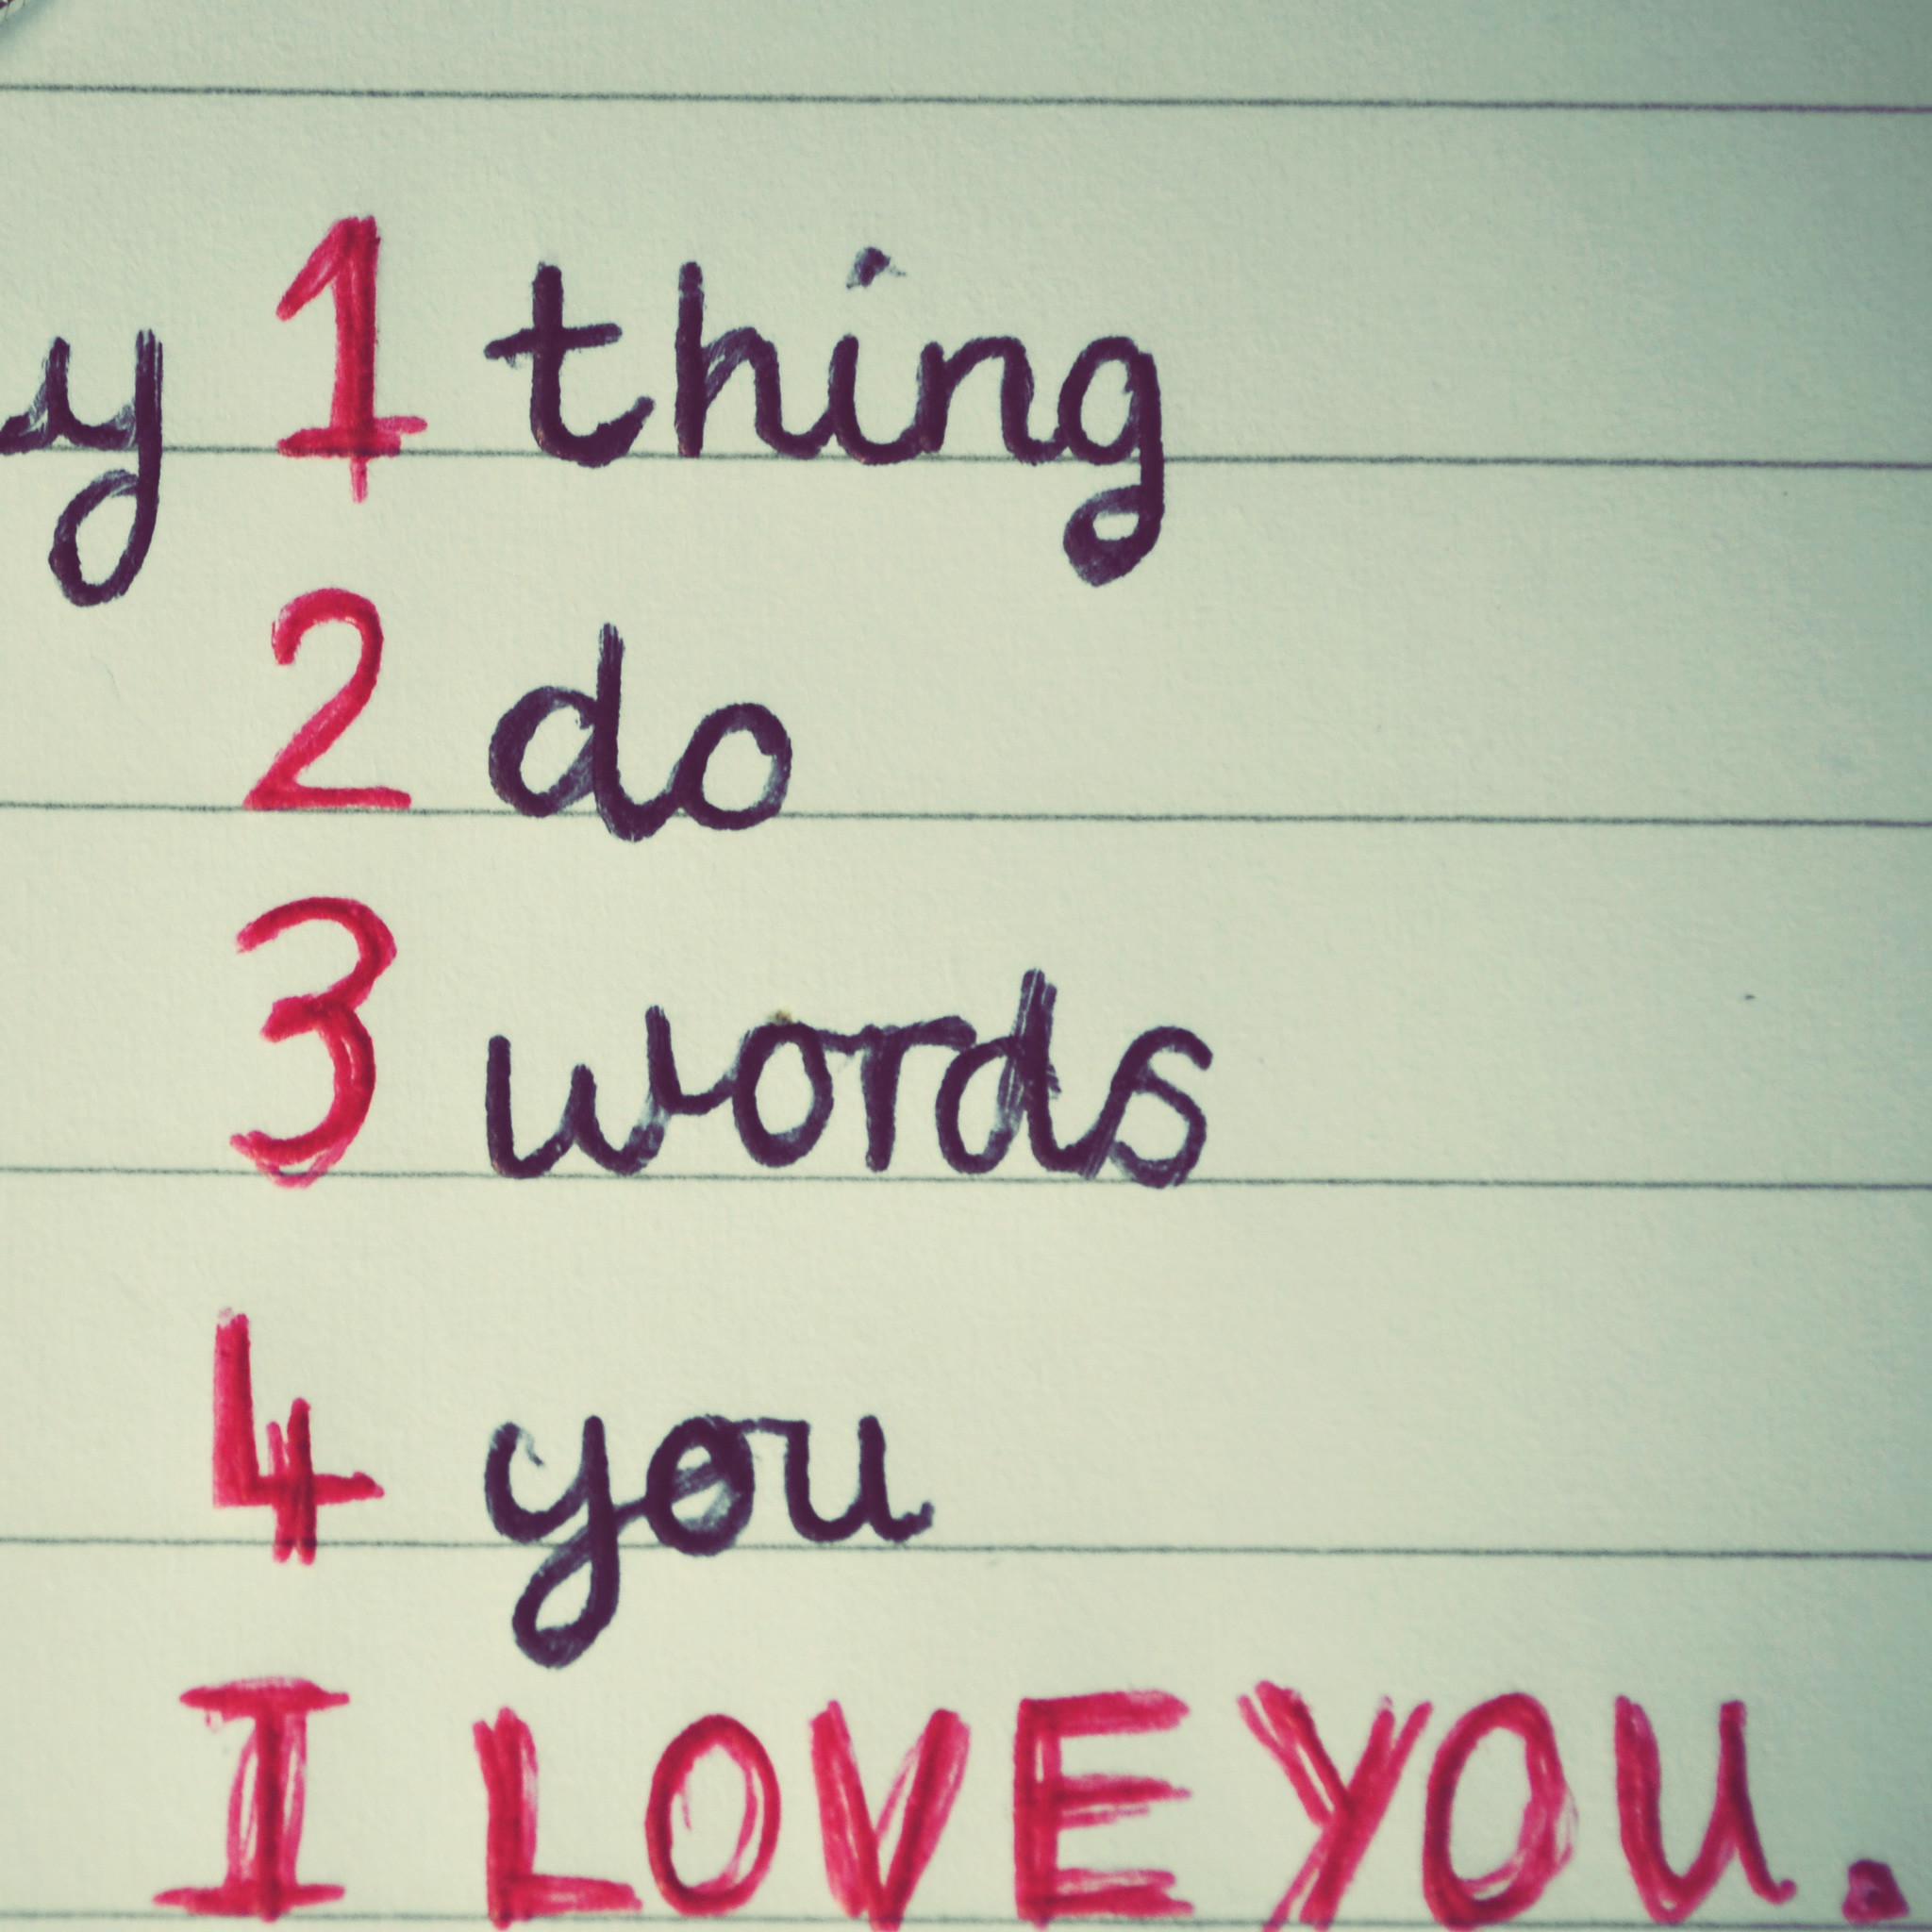 2048x2048 1 thing 2 do, three words 4 you: I love you <3